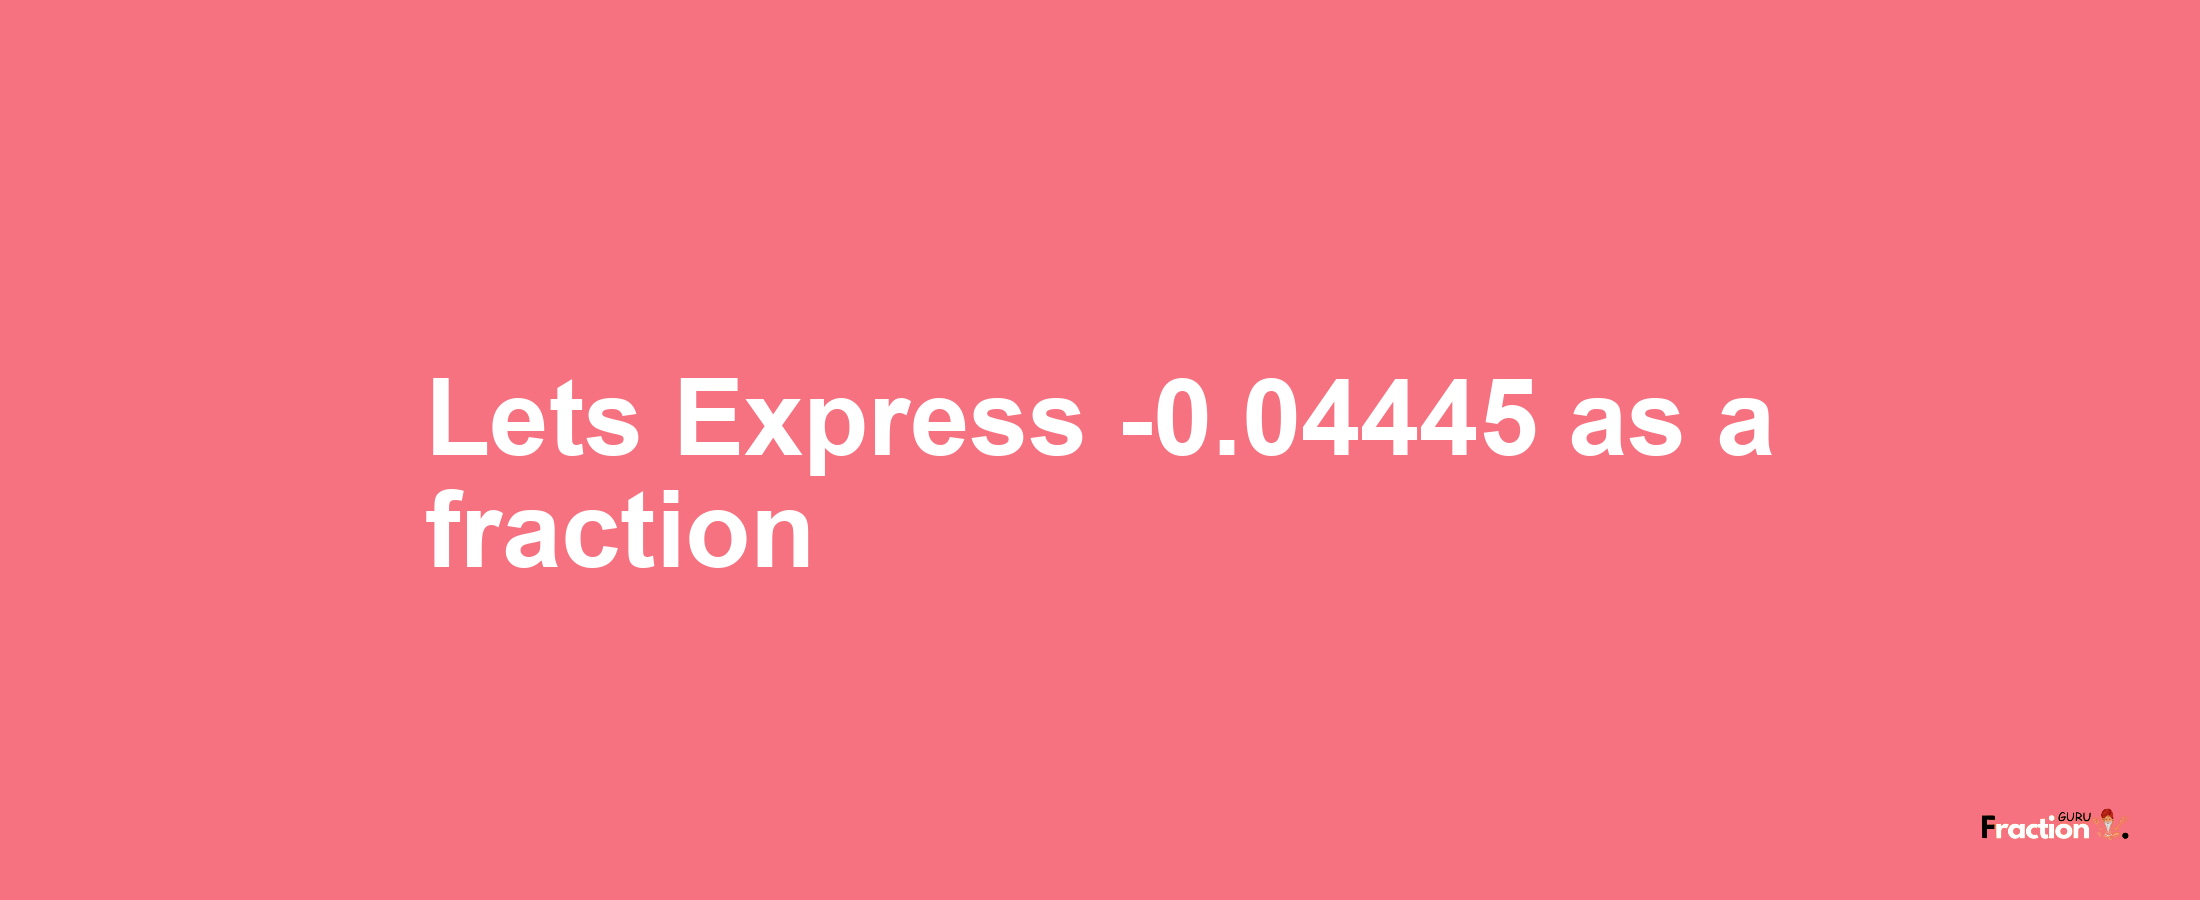 Lets Express -0.04445 as afraction